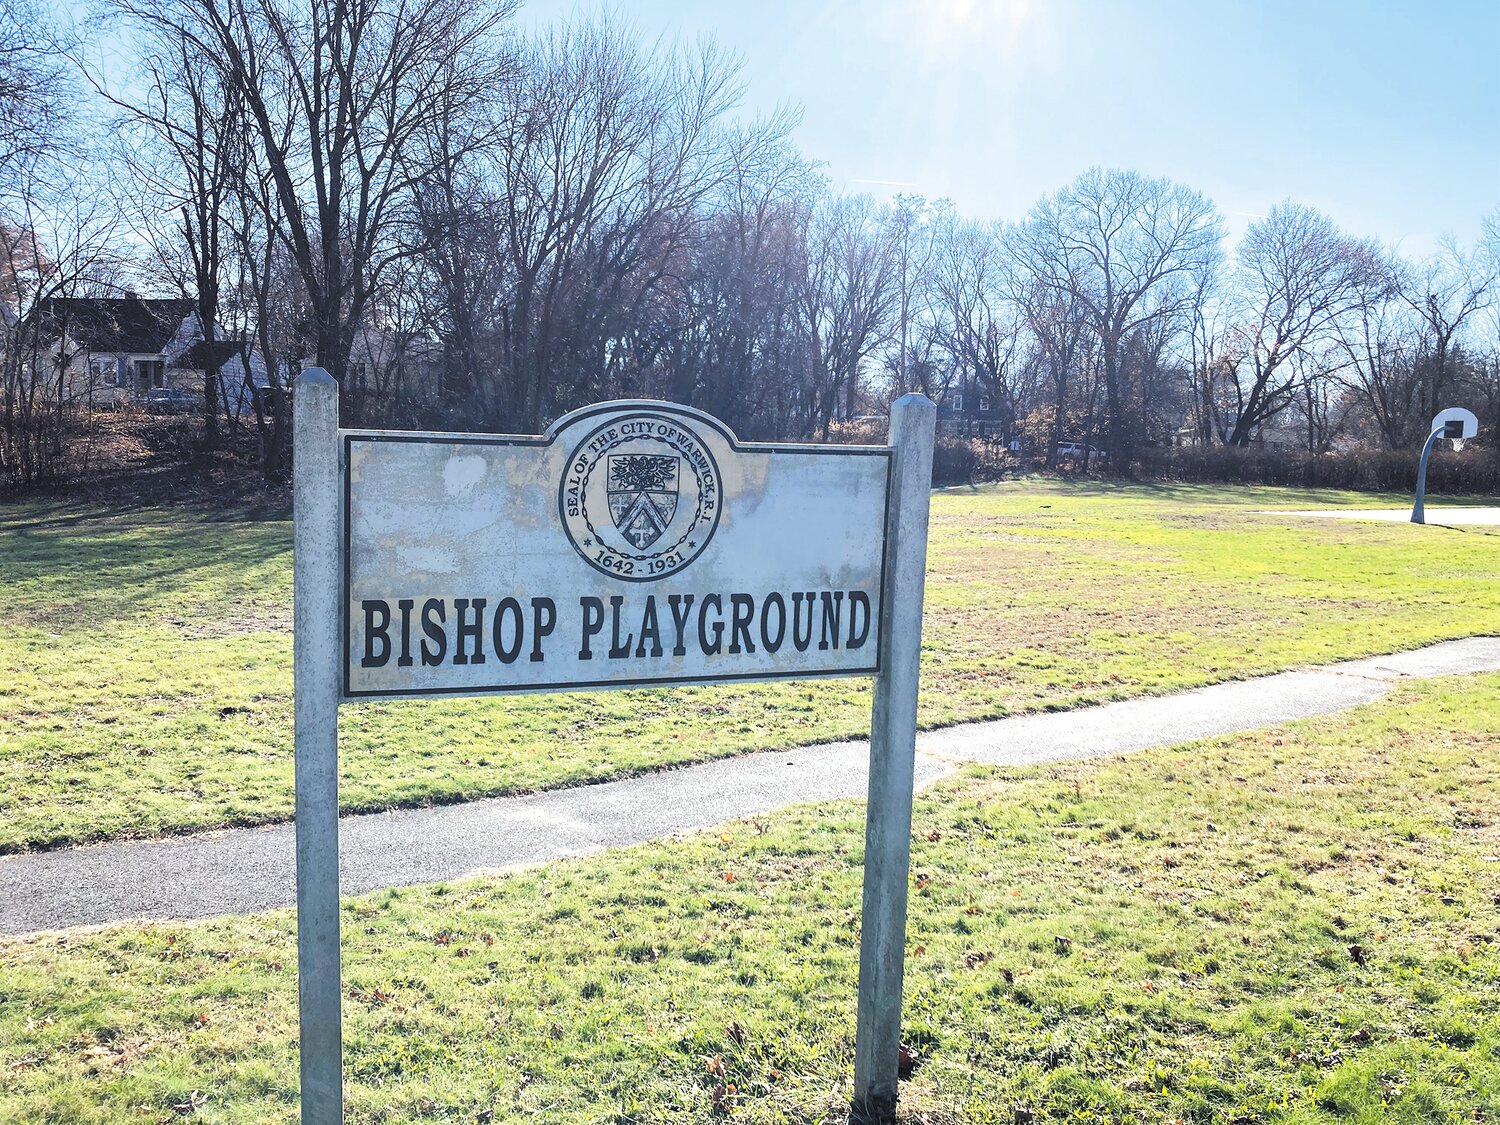 SPRUCING UP THE PARK: Some of Councilwoman Donna Travis’s funds are going towards revamping the dog park at City Park. While plans aren’t finalized, they may include moving the park to a more shaded area and making it more handicap-accessible.